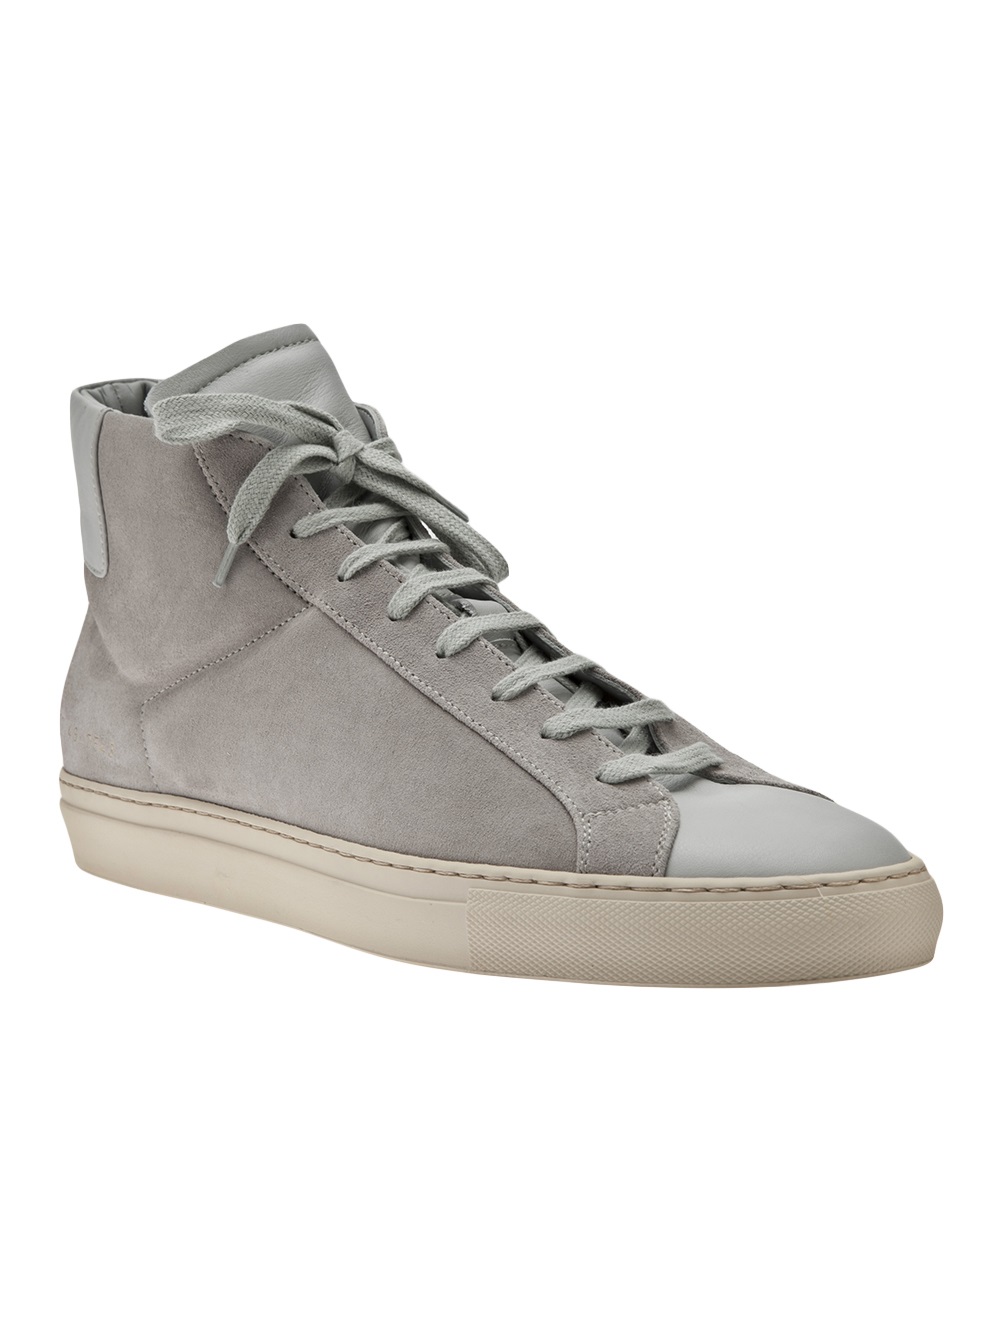 Lyst - Common Projects High Top Sneaker in Gray for Men